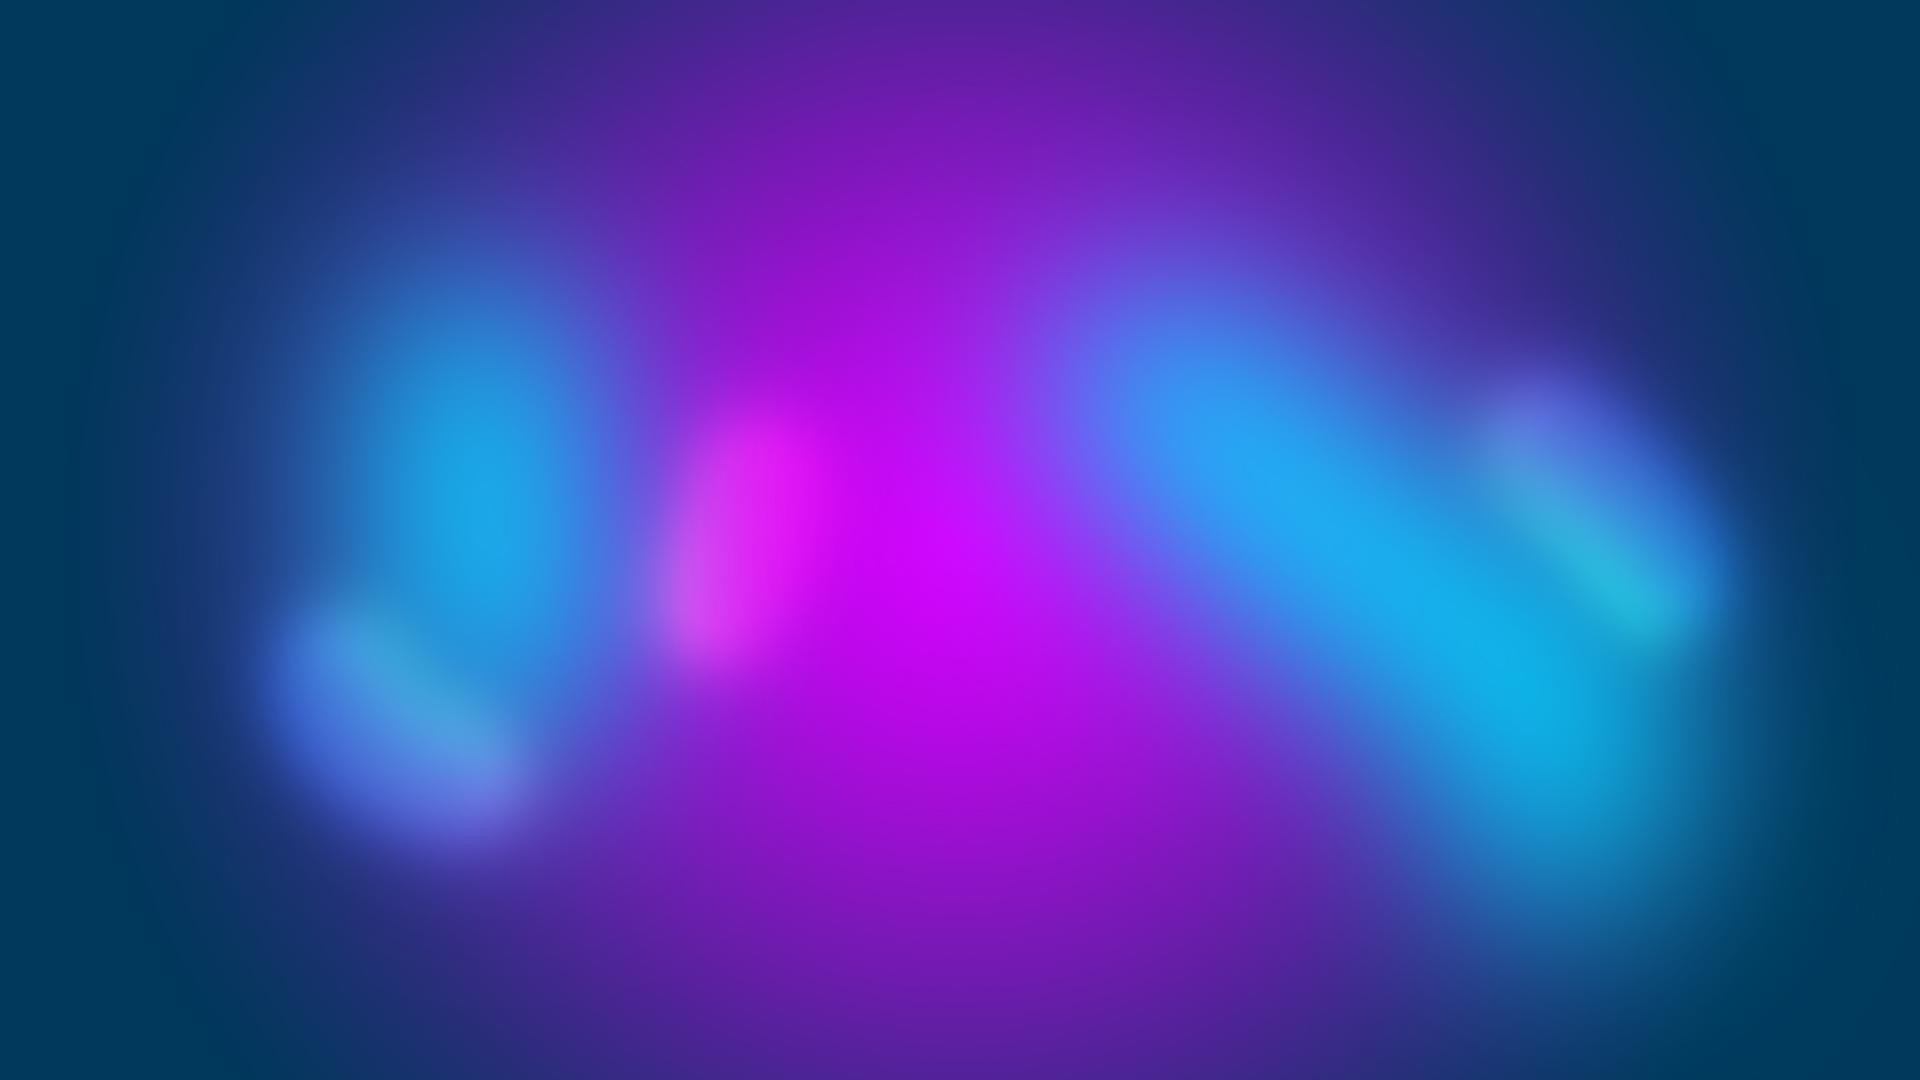 1920x1080  hd Violet blue theme background for computer wide wallpapers :1280x800,1440x900,1680x1050